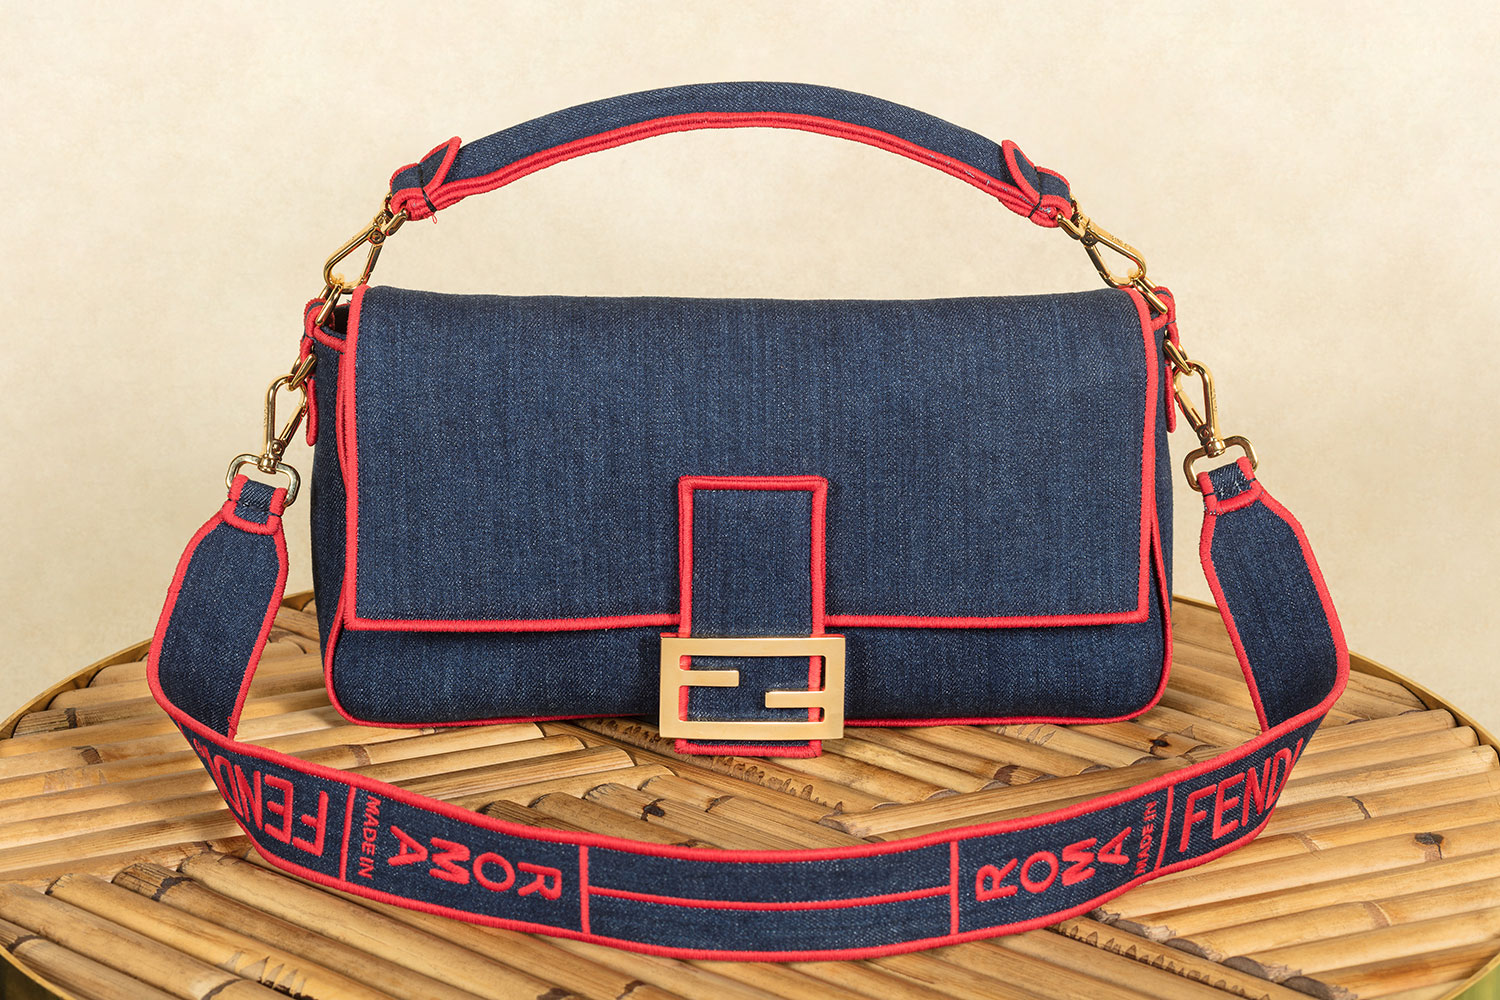 fendi bags new collection 2019